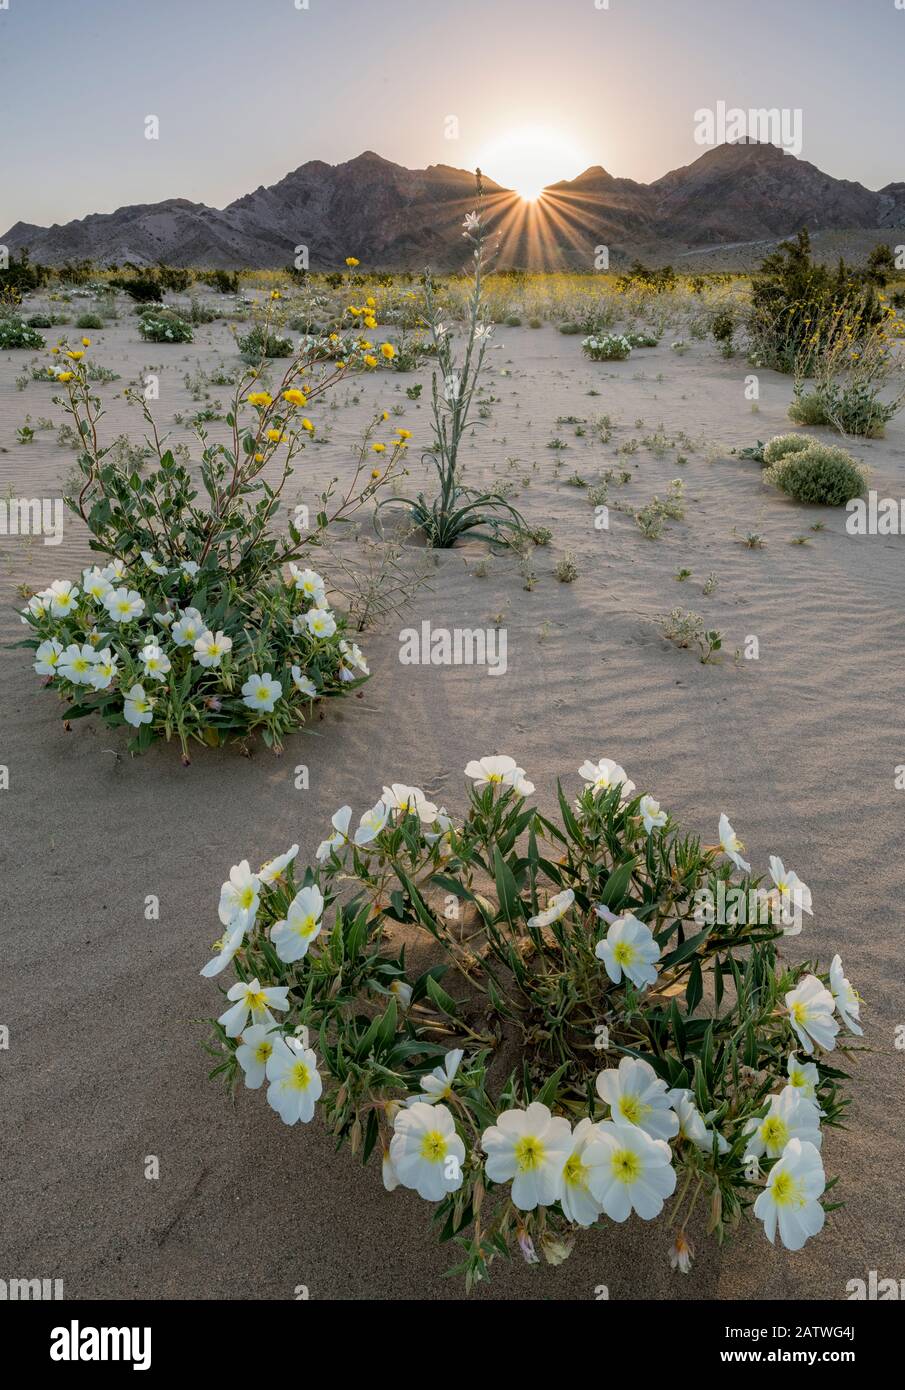 Birdcage evening primrose (Oenothera deltoides) and desert golds (Geraea canescens) carpet the sandy washes beneath the Calumet Mountains at dawn. Mojave Trail National Monument, Mojave Desert, California, USA. 17th March 2019. Stock Photo